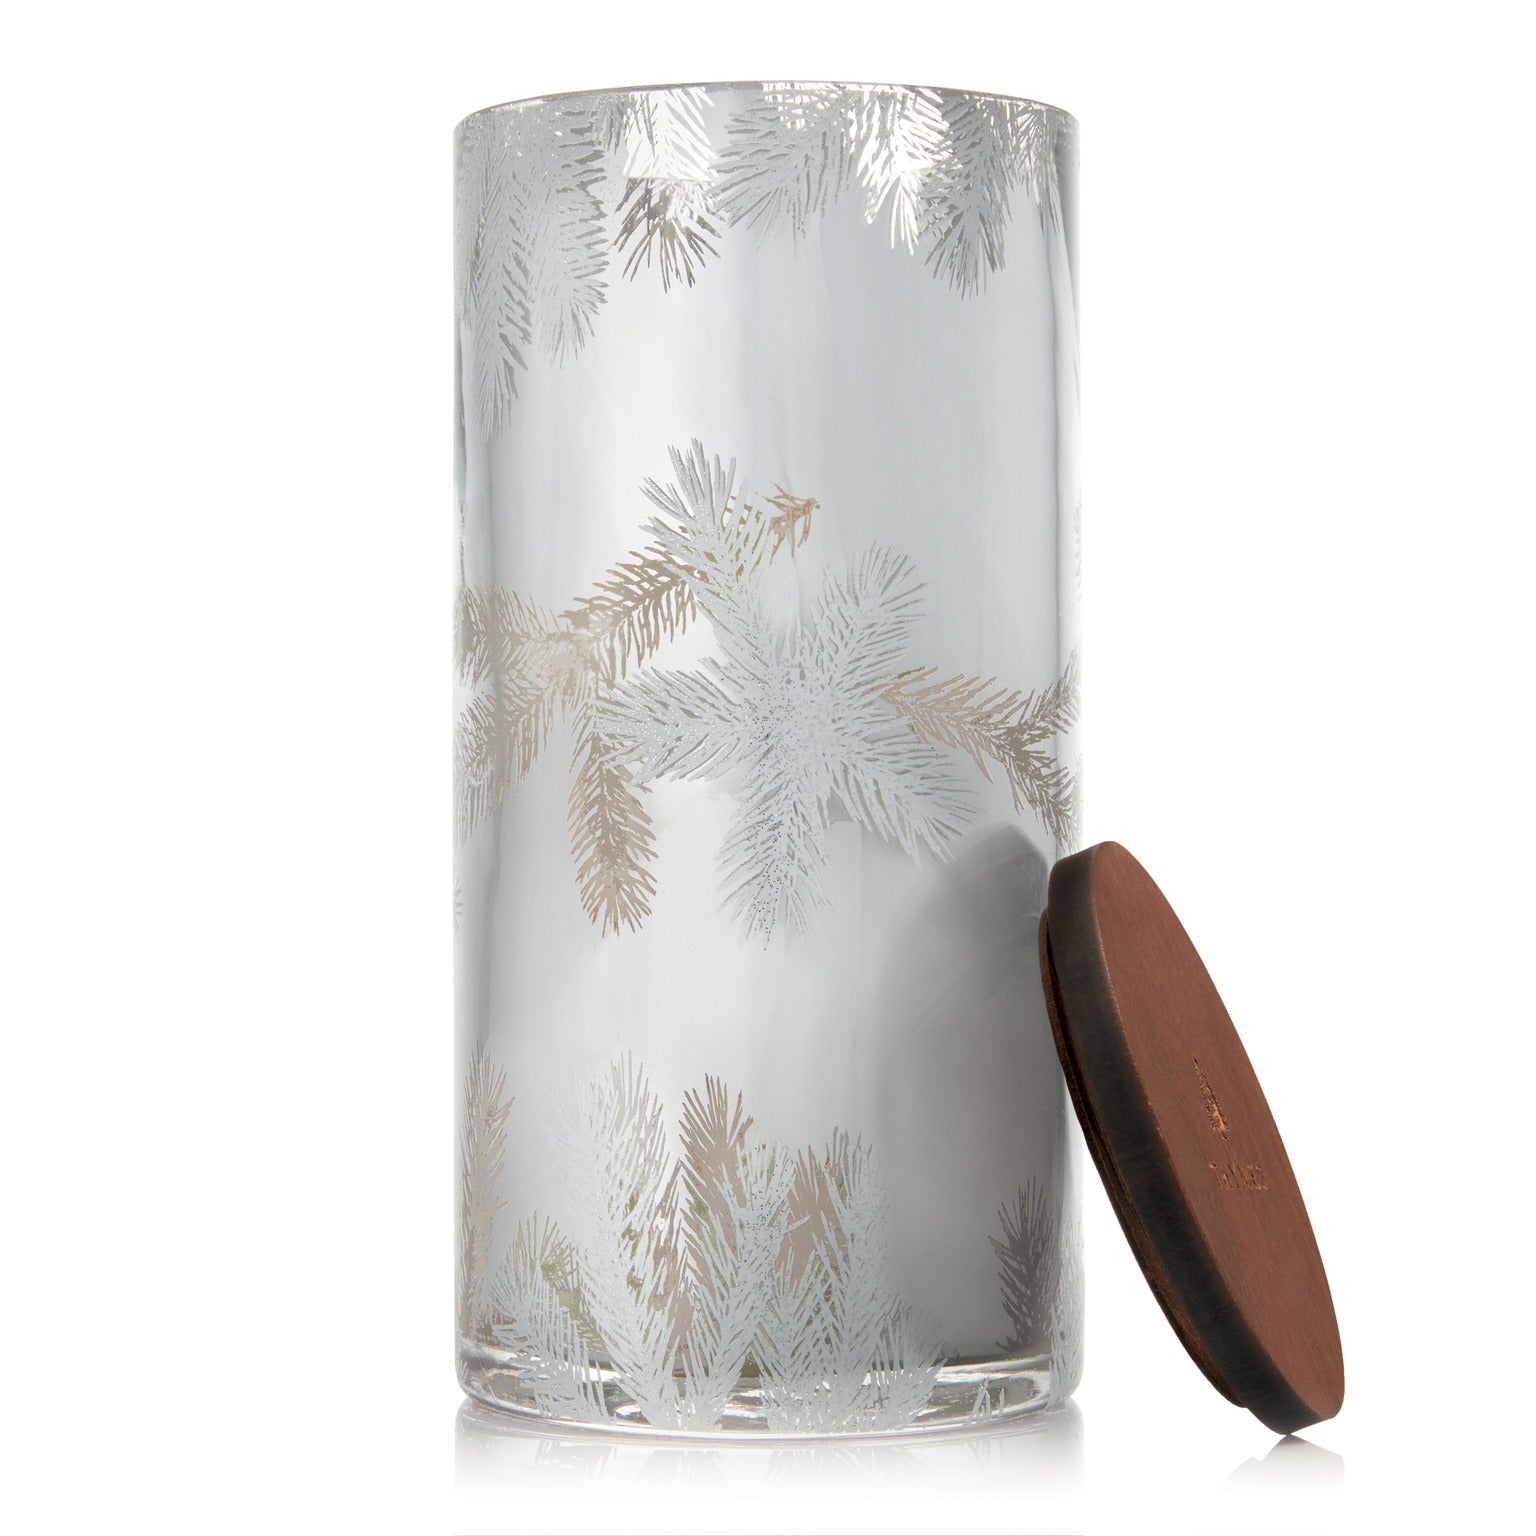 Thymes Frasier Fir Statement Luminary Candle - Large